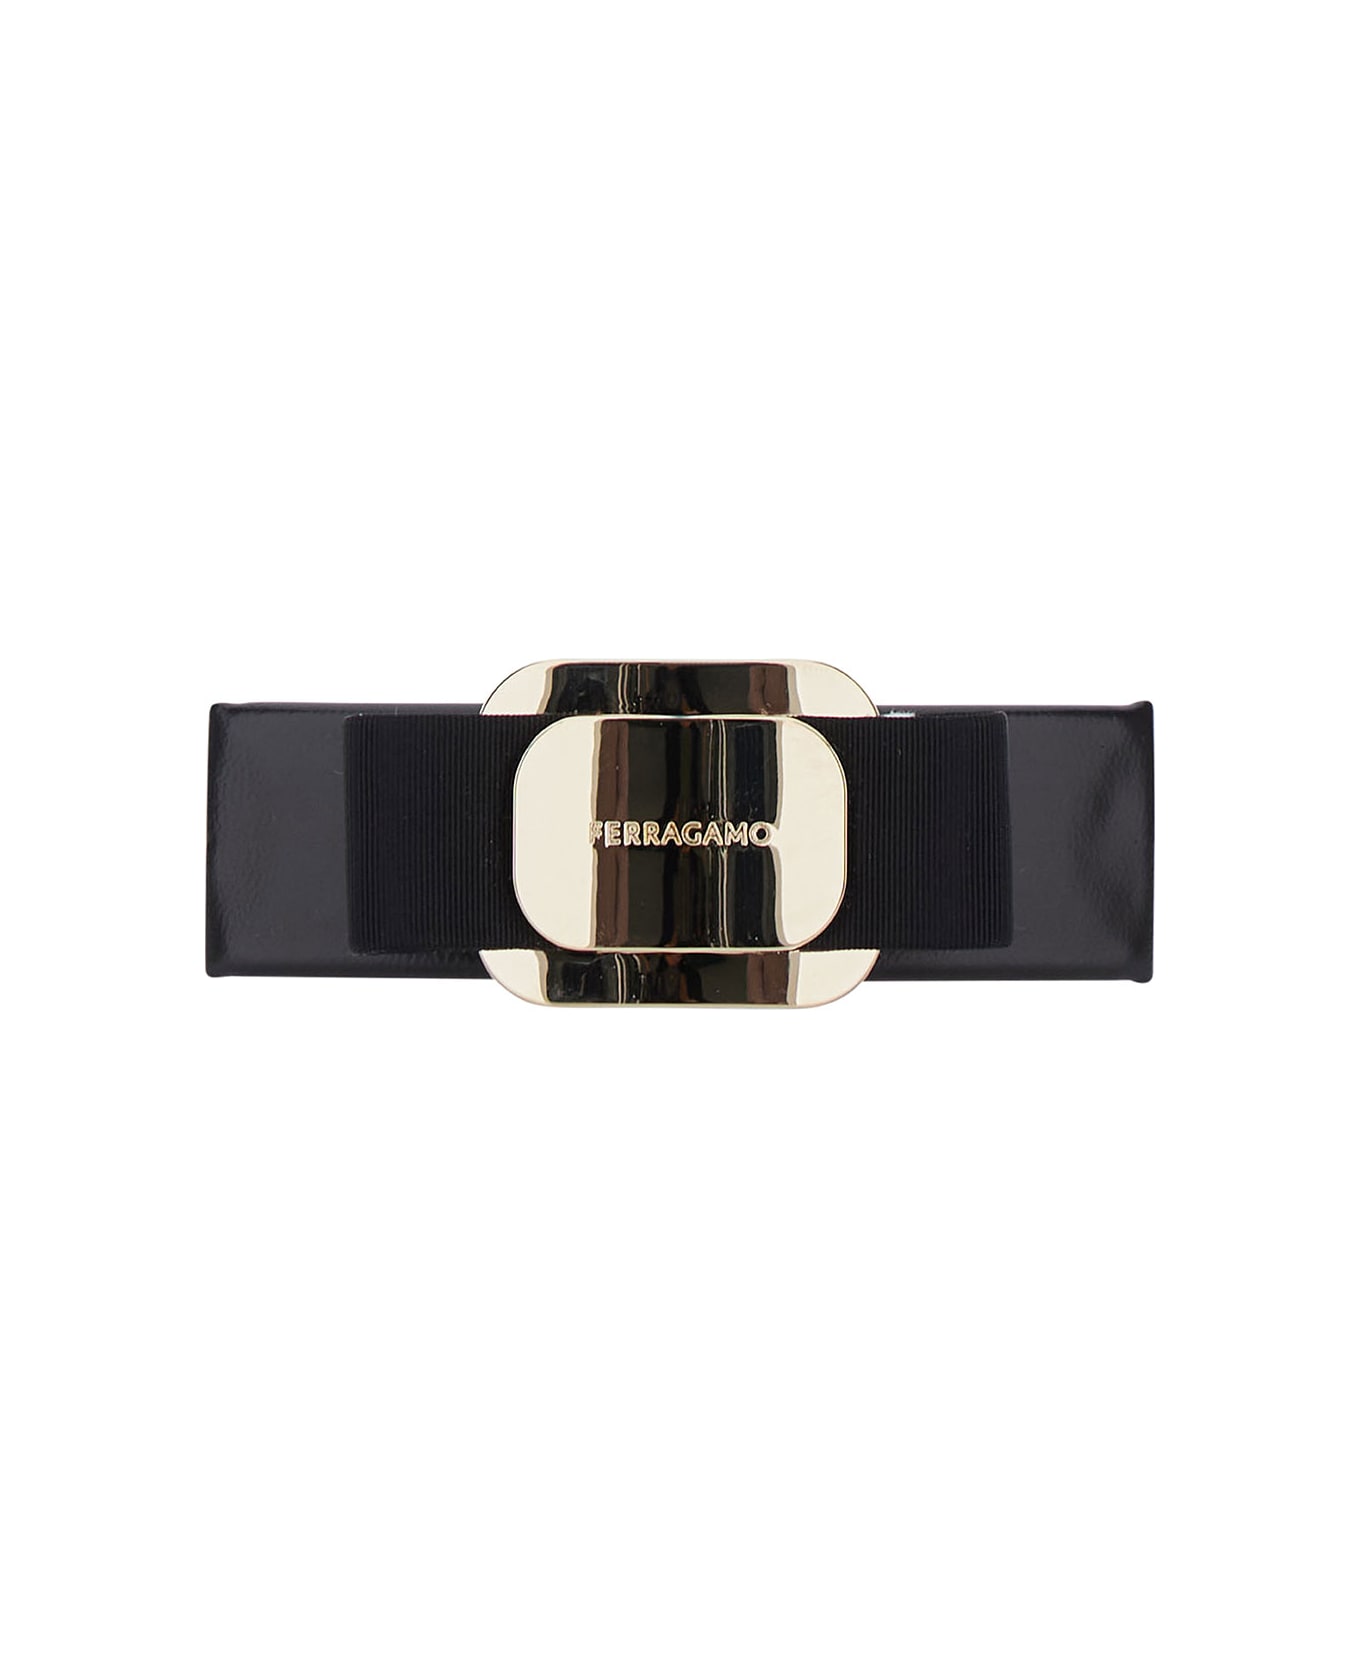 Ferragamo Black Hairclip With Vara Bow In Leather Blend Woman - Black ブローチ